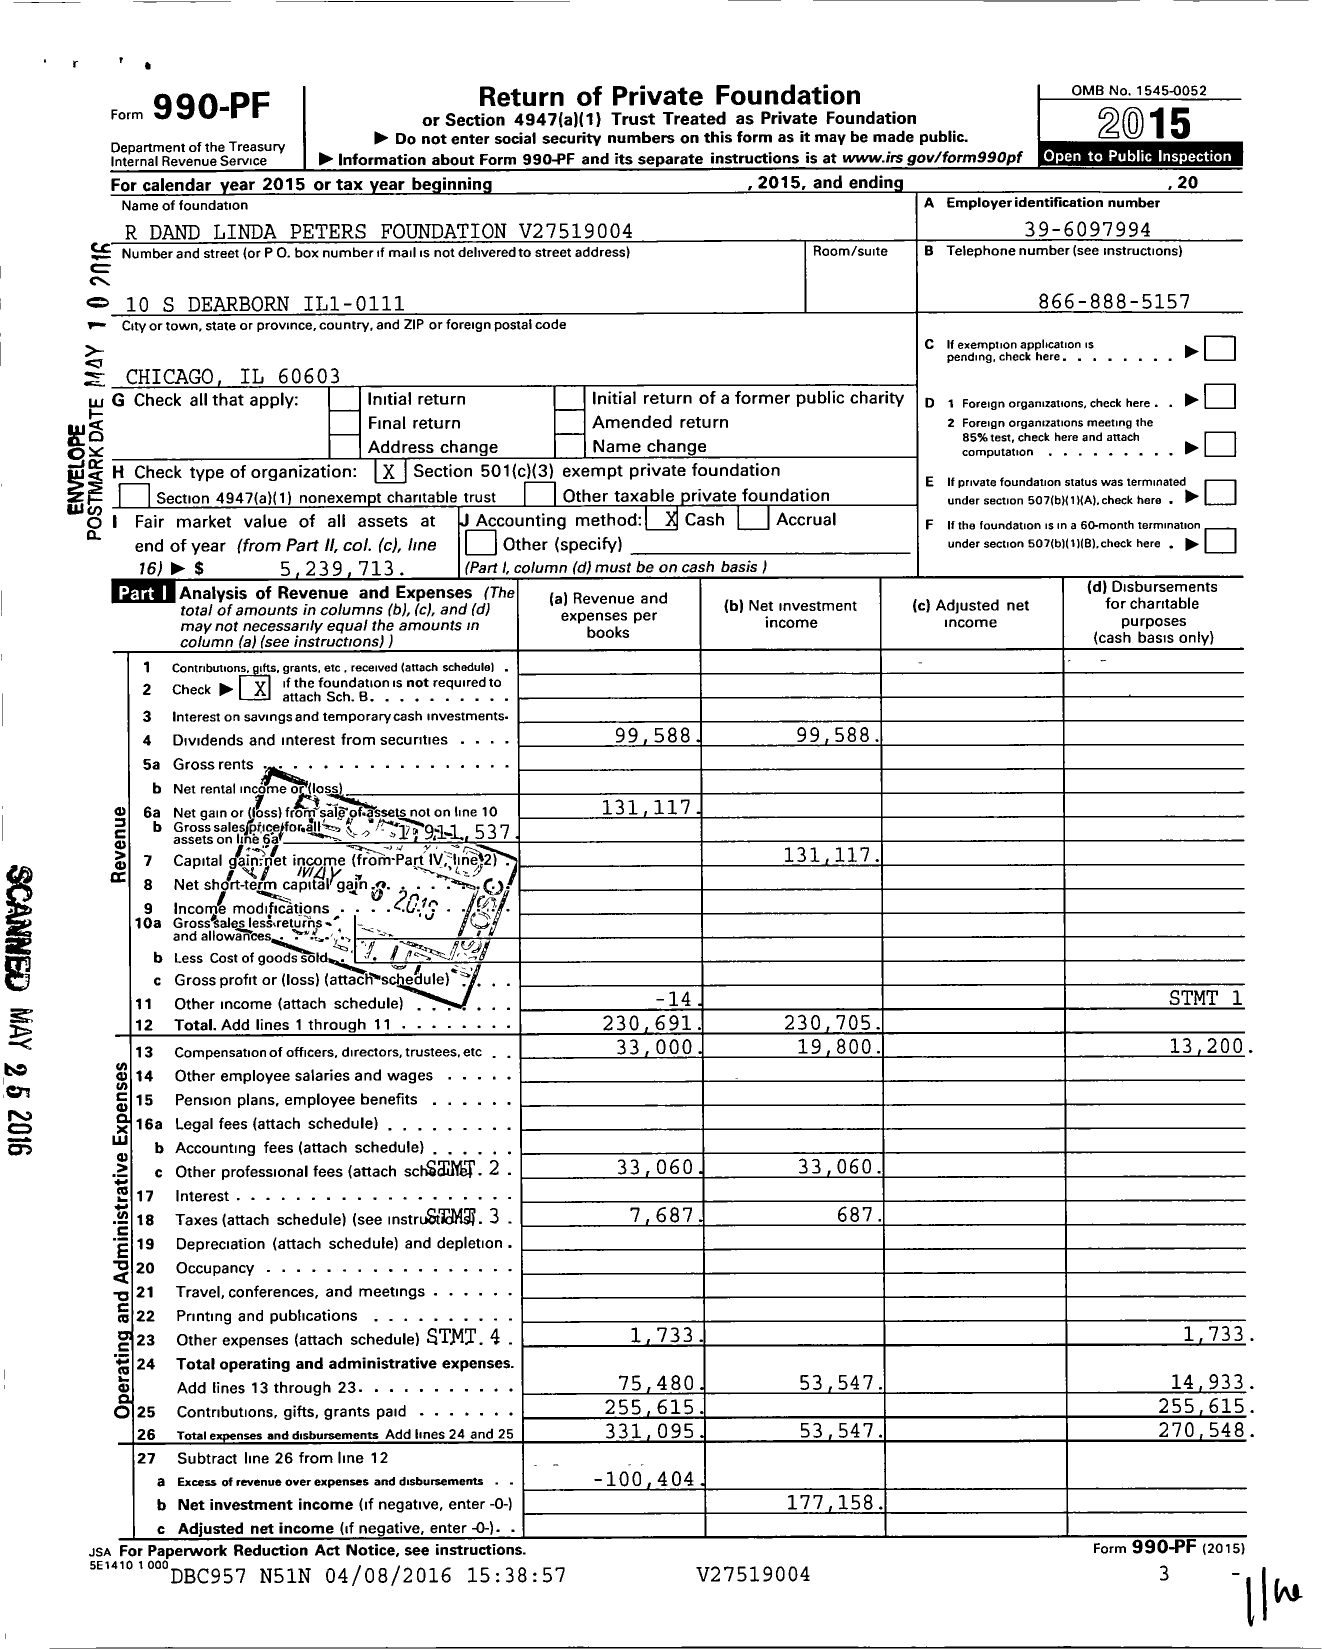 Image of first page of 2015 Form 990PF for Rd and Linda Peters Foundation